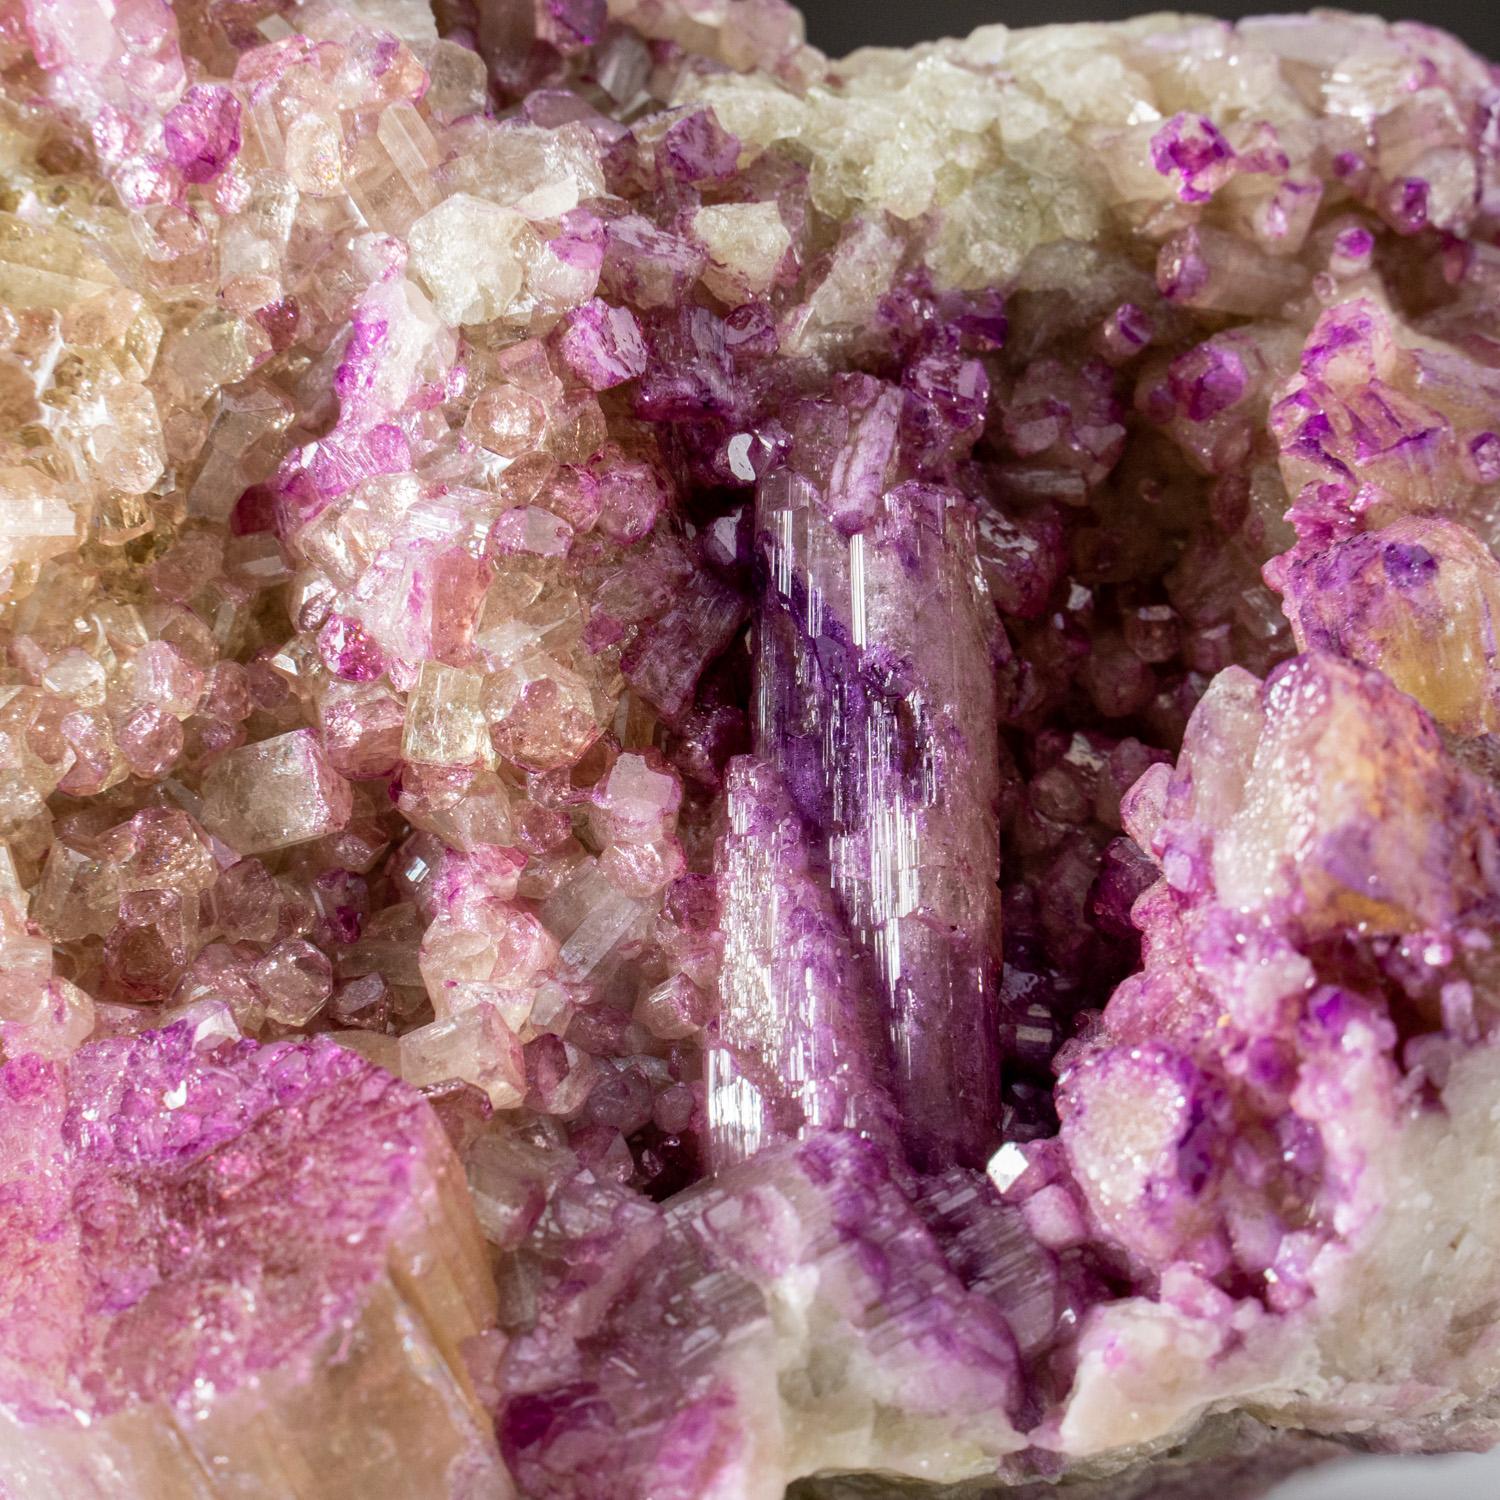 From Jeffrey Mine, Asbestos, Québec, Canada

Sparkling cluster of large cluster of violet-colored vesuvianite crystals crystallized all around on greenish massive vesuvianite matrix. It appears the earliest vesuvianite crystals are green color, with